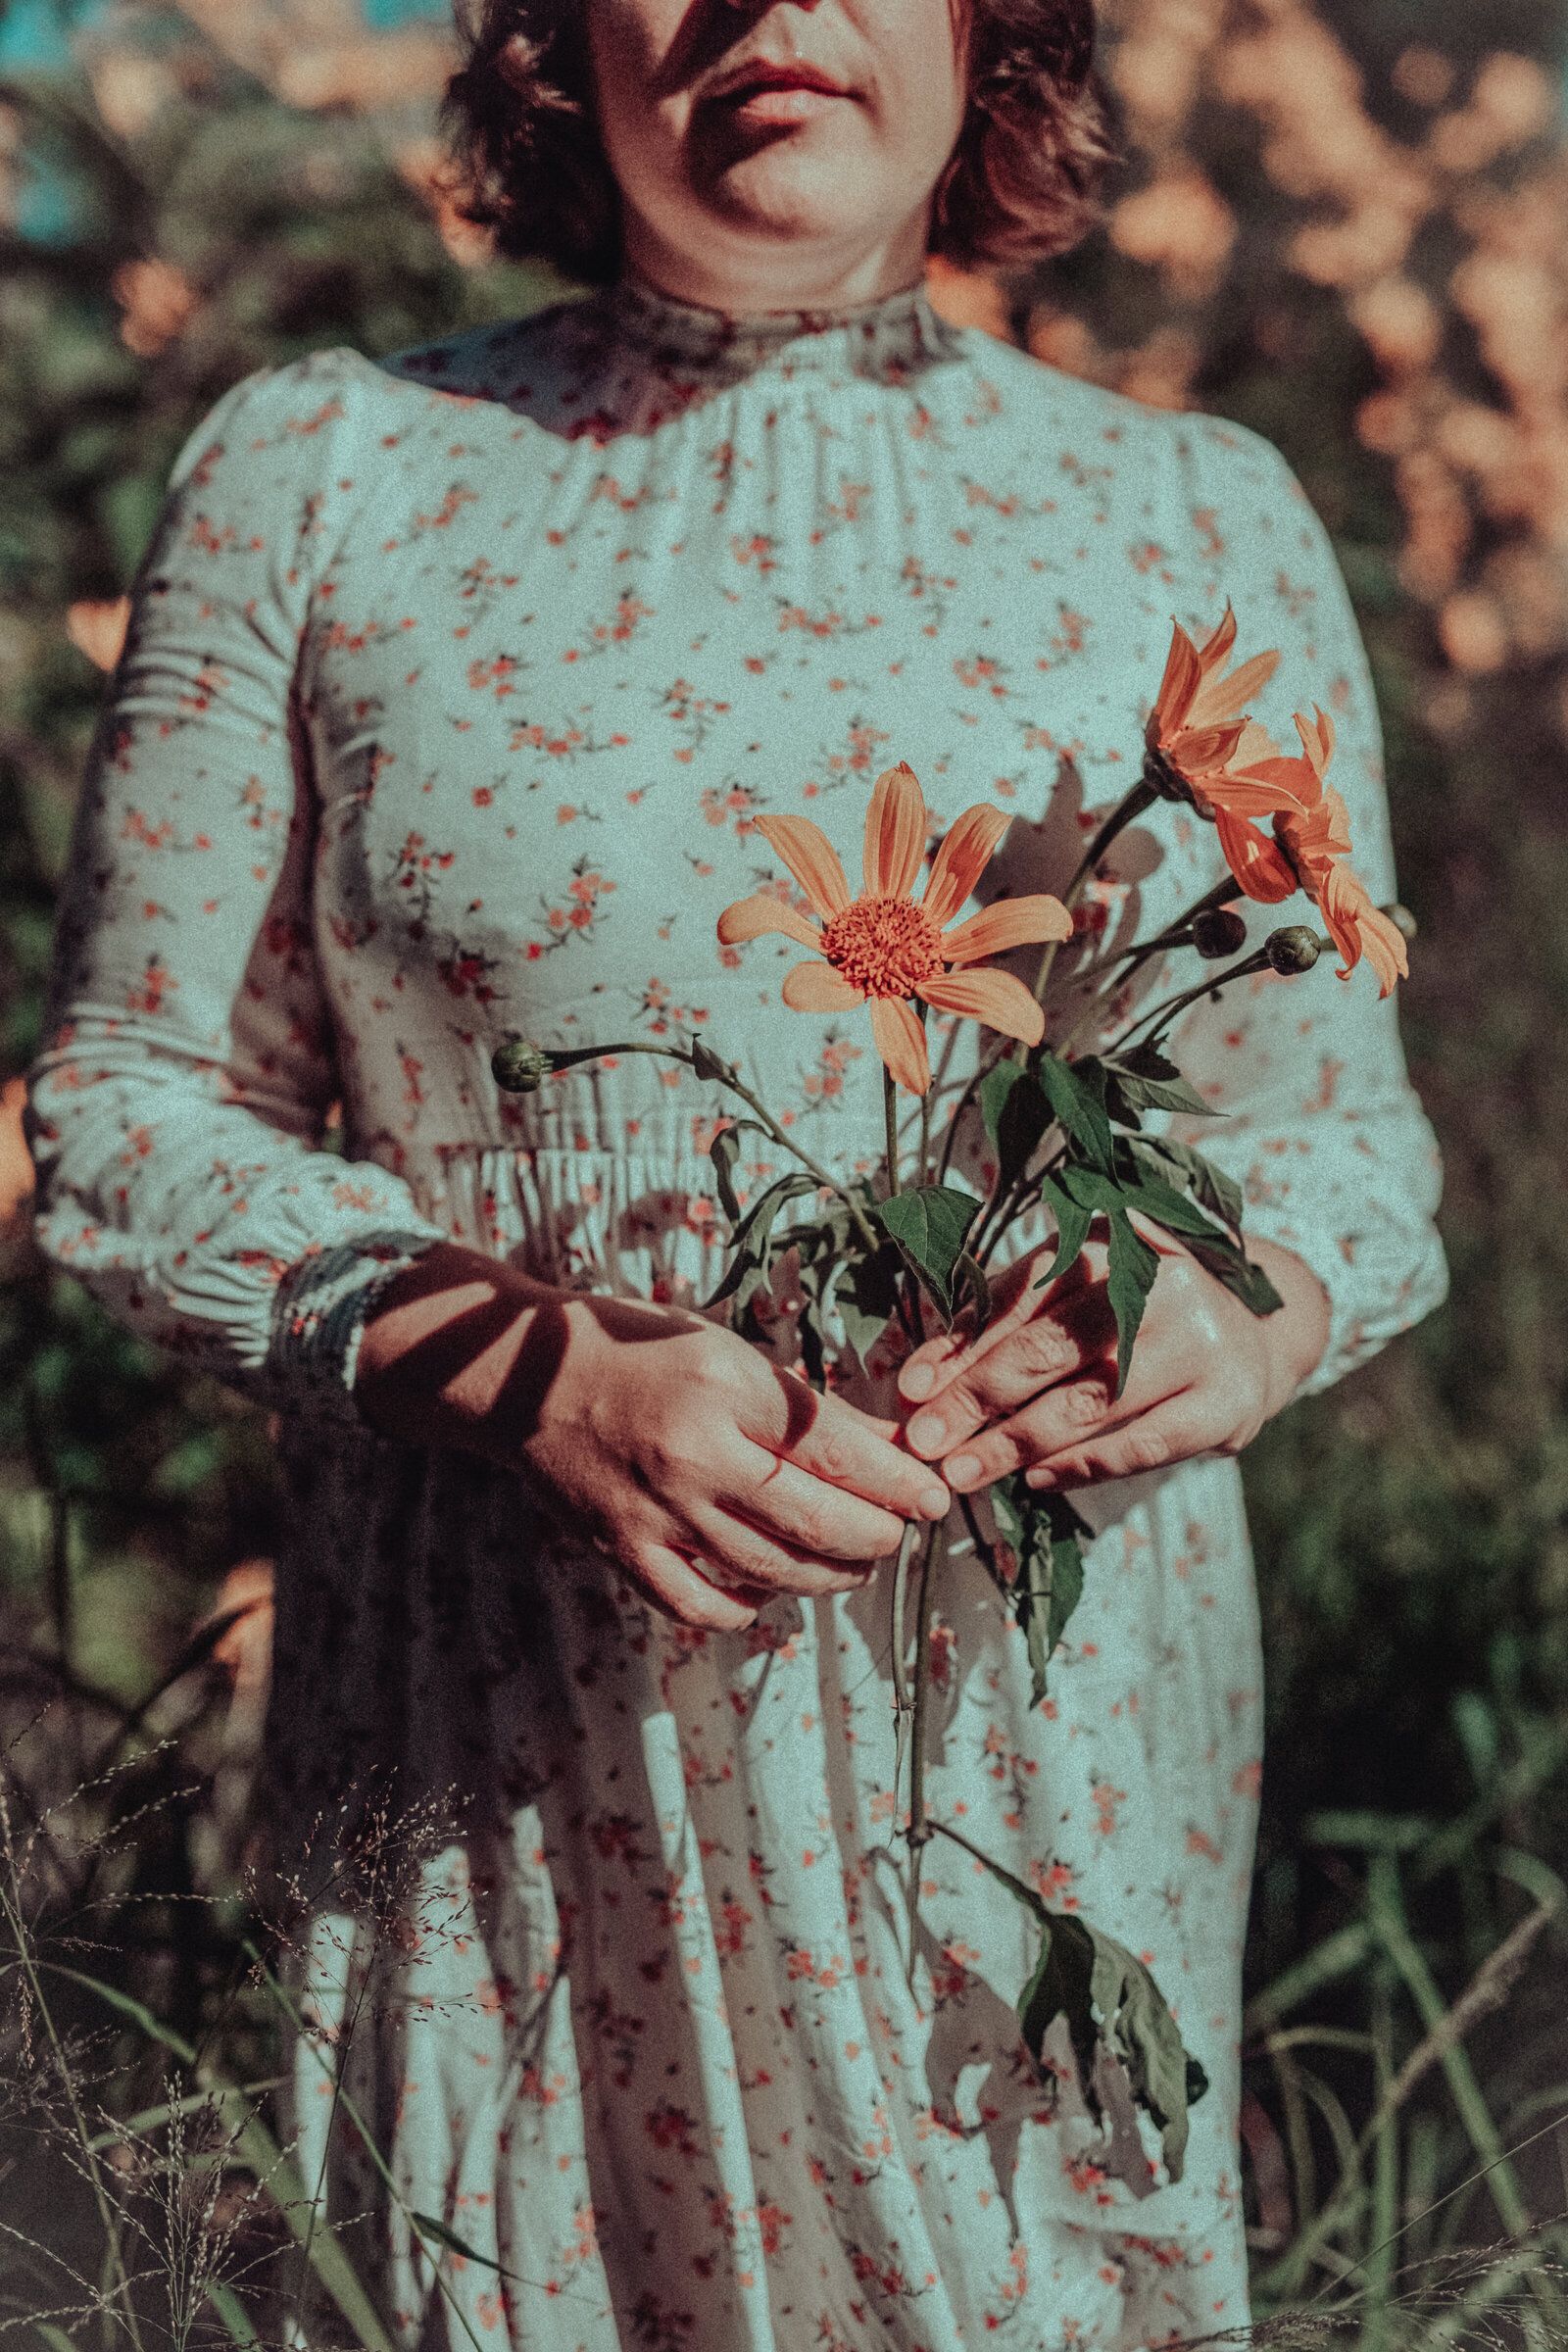 Personal branding photograph featuring woman and floral decor